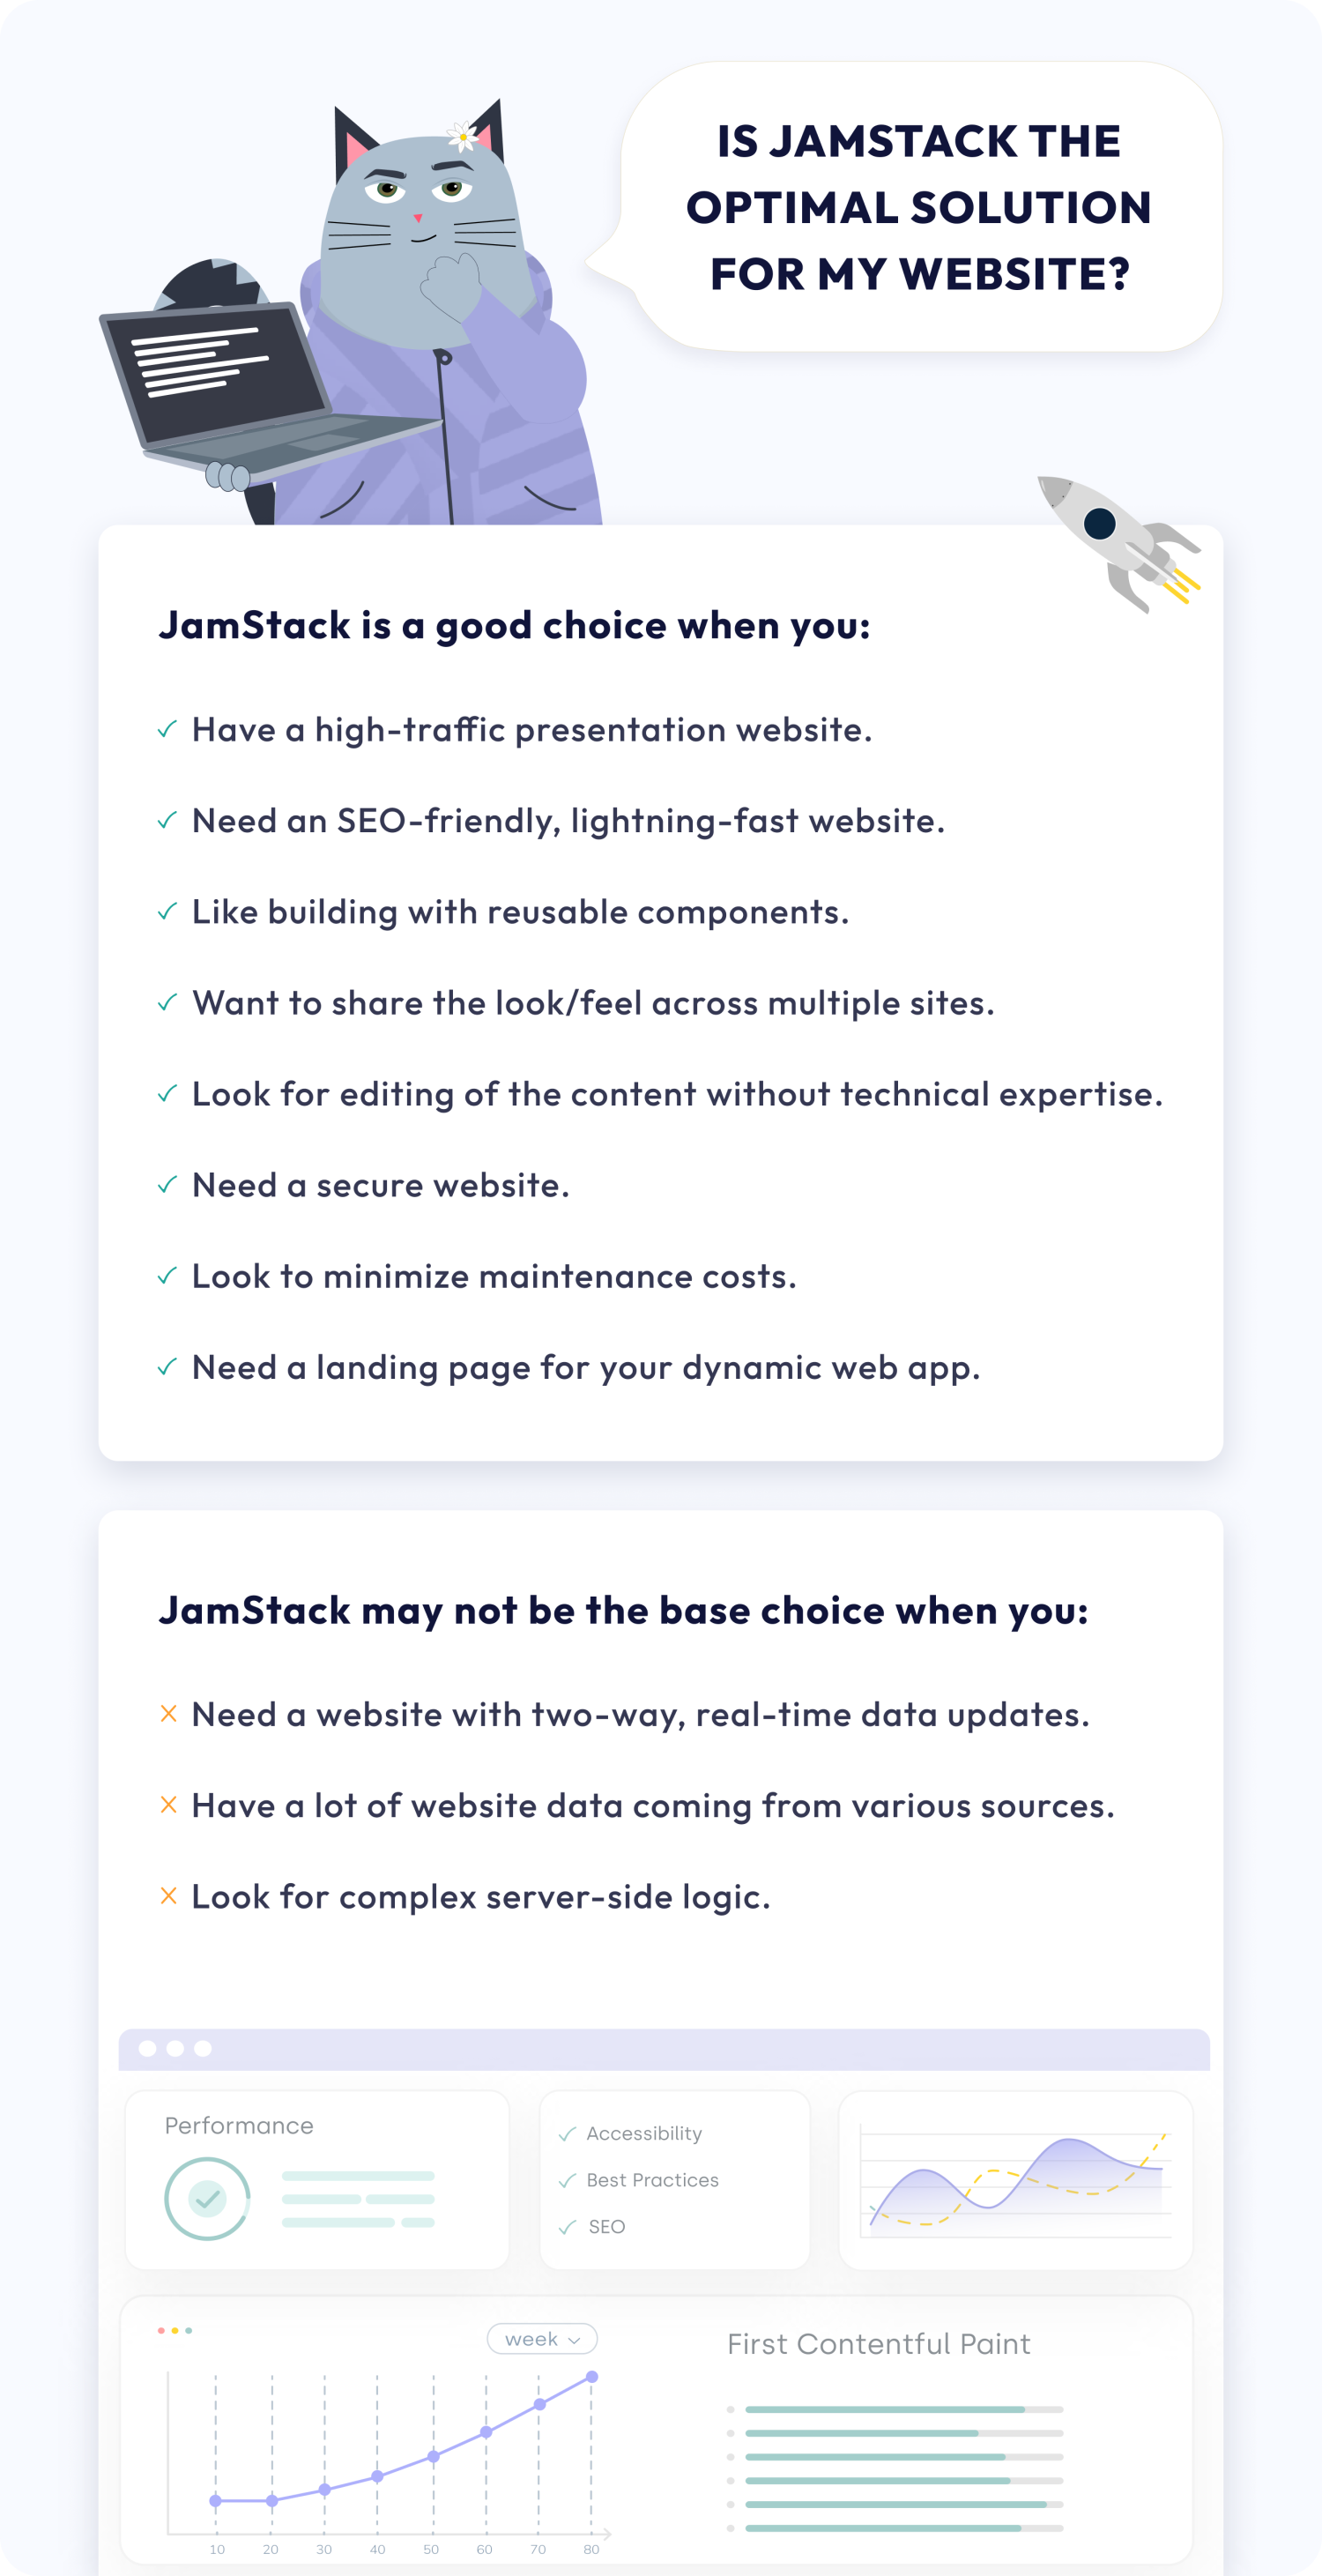 Advantages and disadvantages of using JamStack for building websites. 